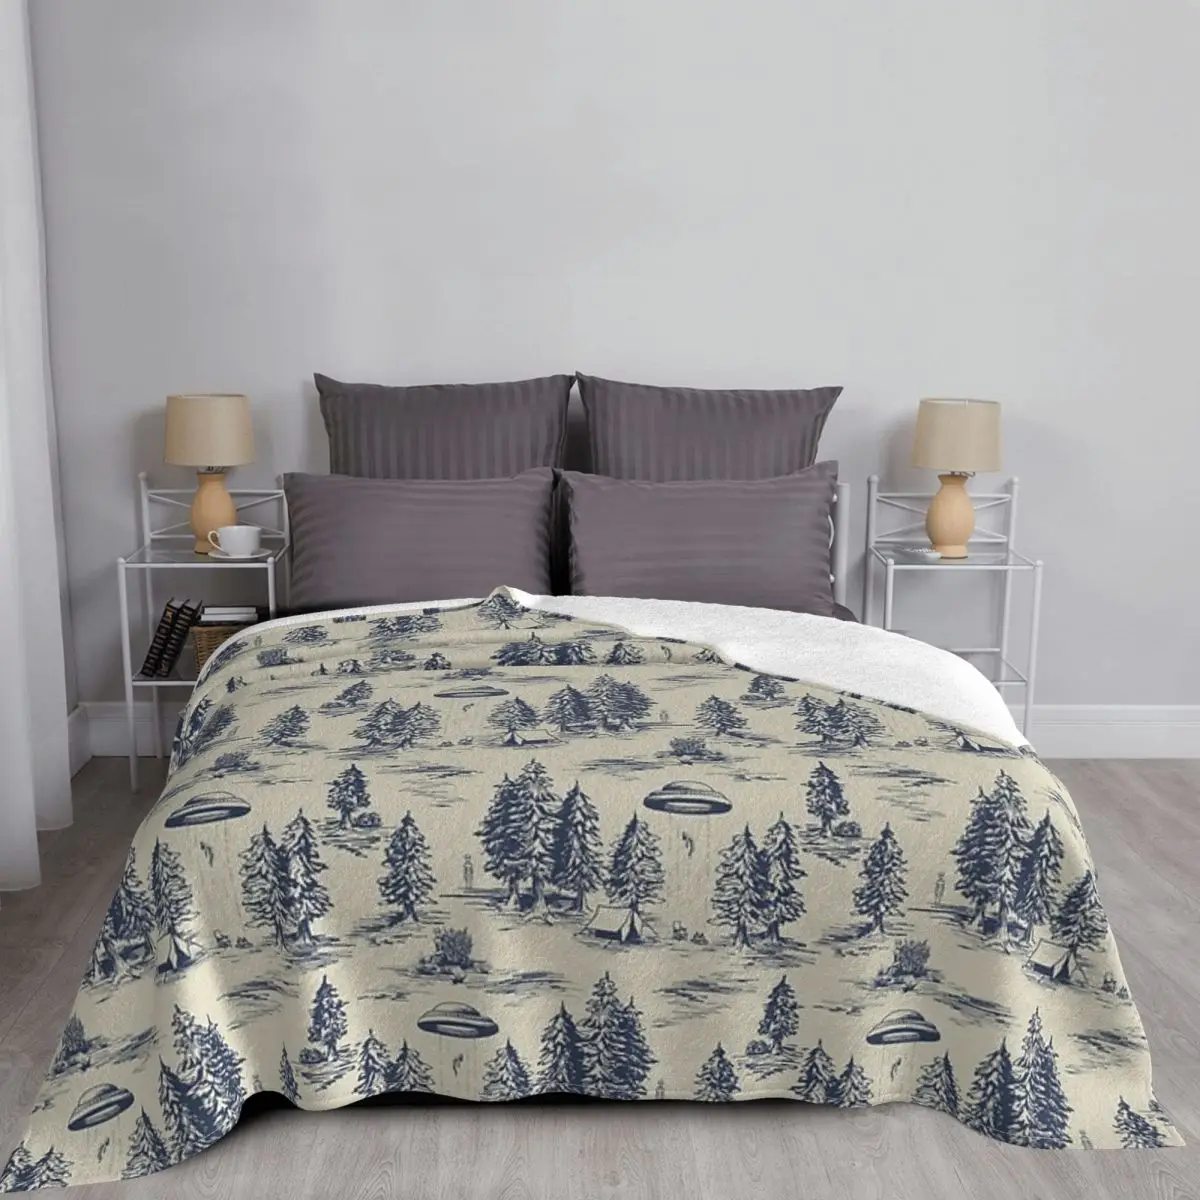 

Alien Abduction Toile De Jouy Pattern In Blue Throw Blanket Cotton Blanket Anime Sofa Blanket Hairy Winter Bed Covers Bed Cover